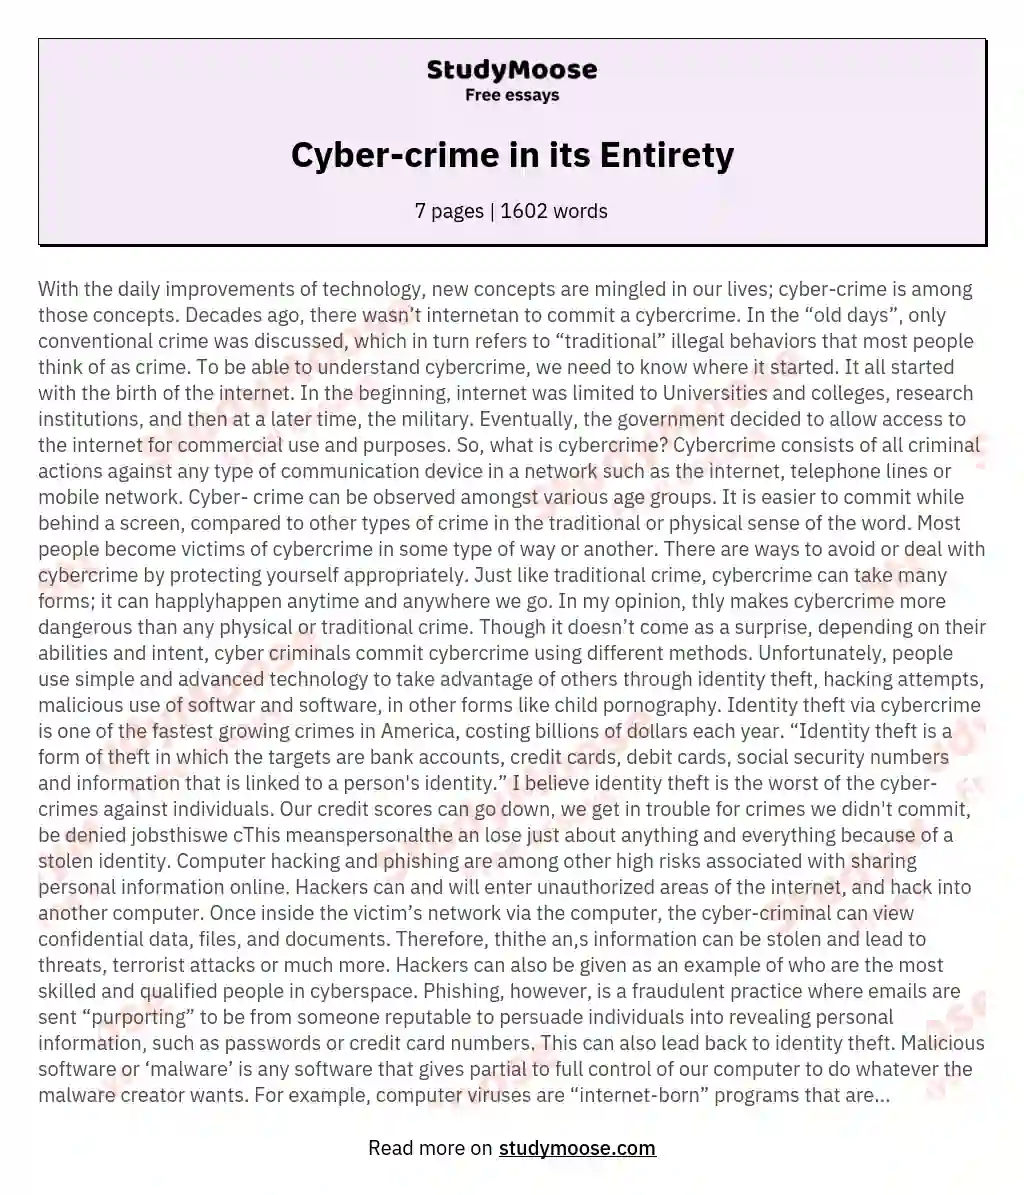 Cyber-crime in its Entirety essay